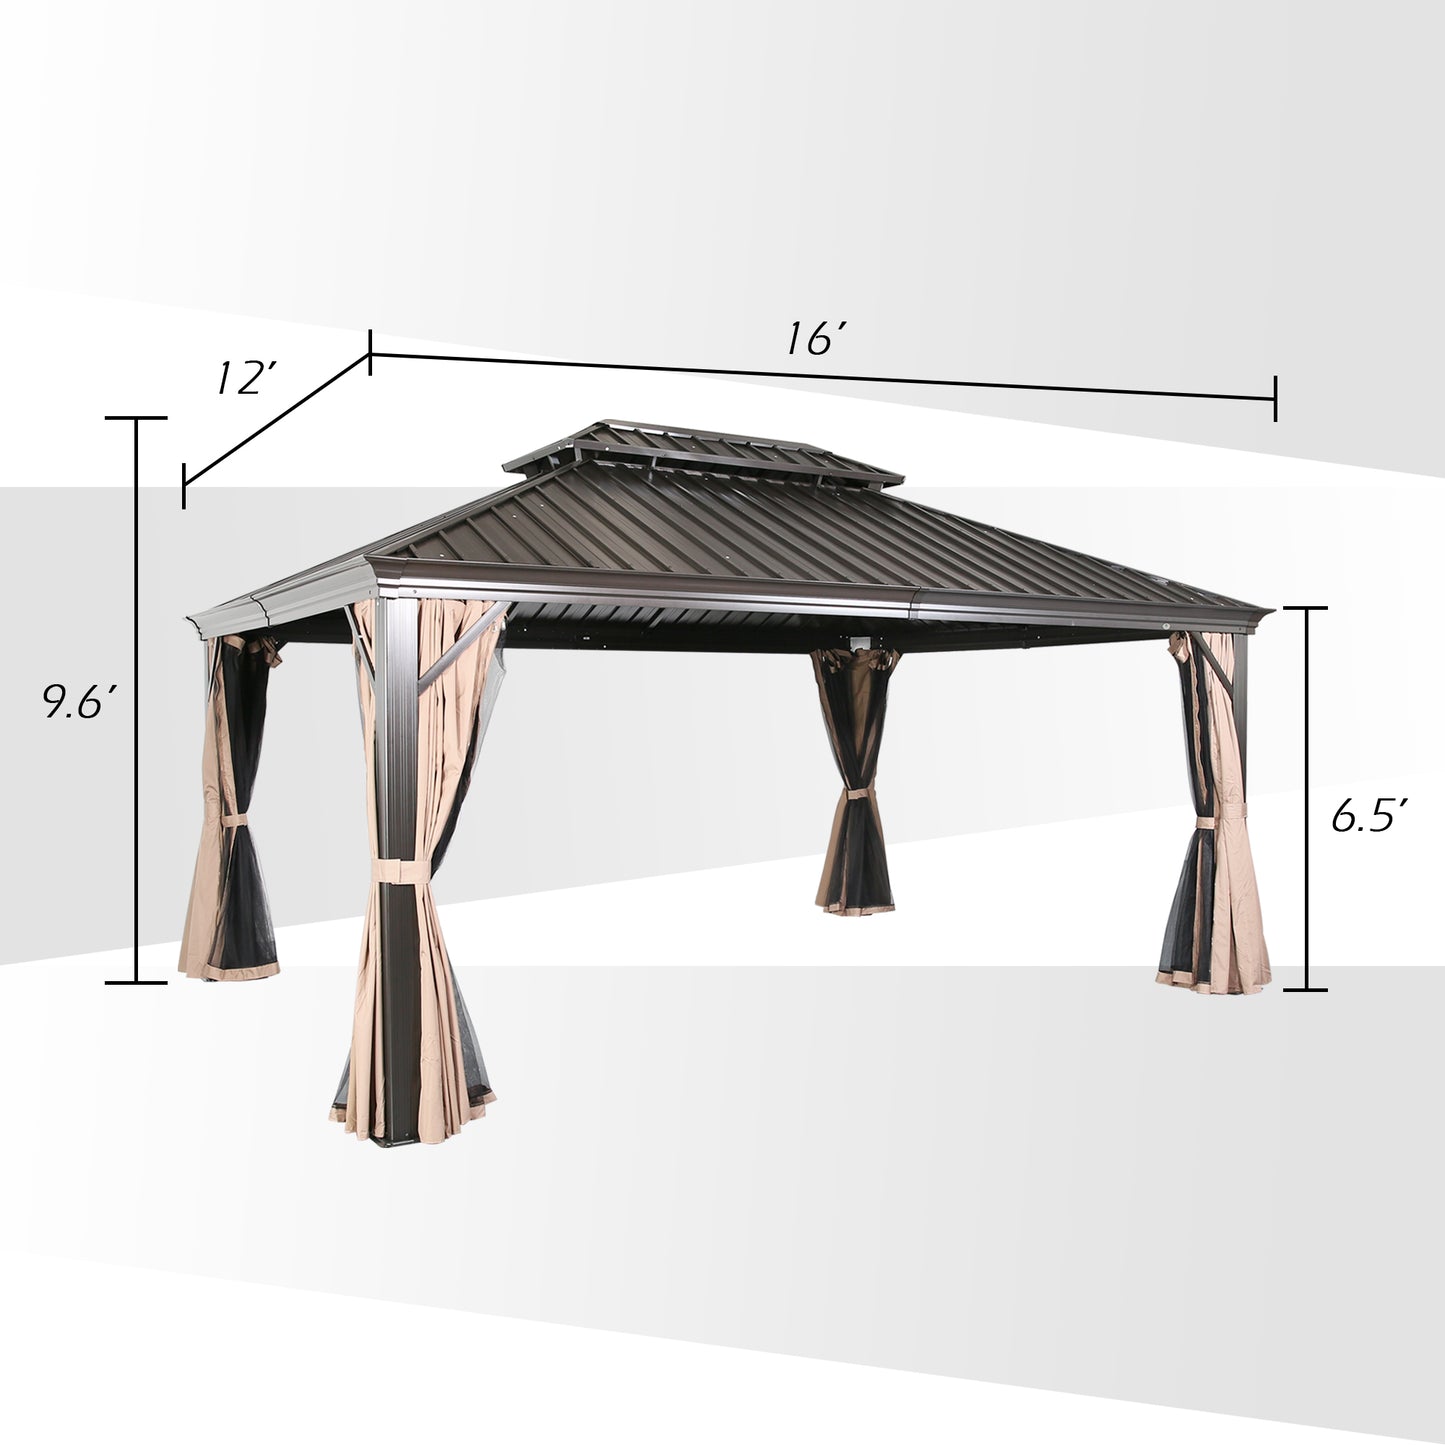 12Ft x 16Ft Patio Hardtop Gazebo Outdoor Aluminum Pergola with Galvanized Steel Roof Canopy, Polyester Curtain and Mosquito Net